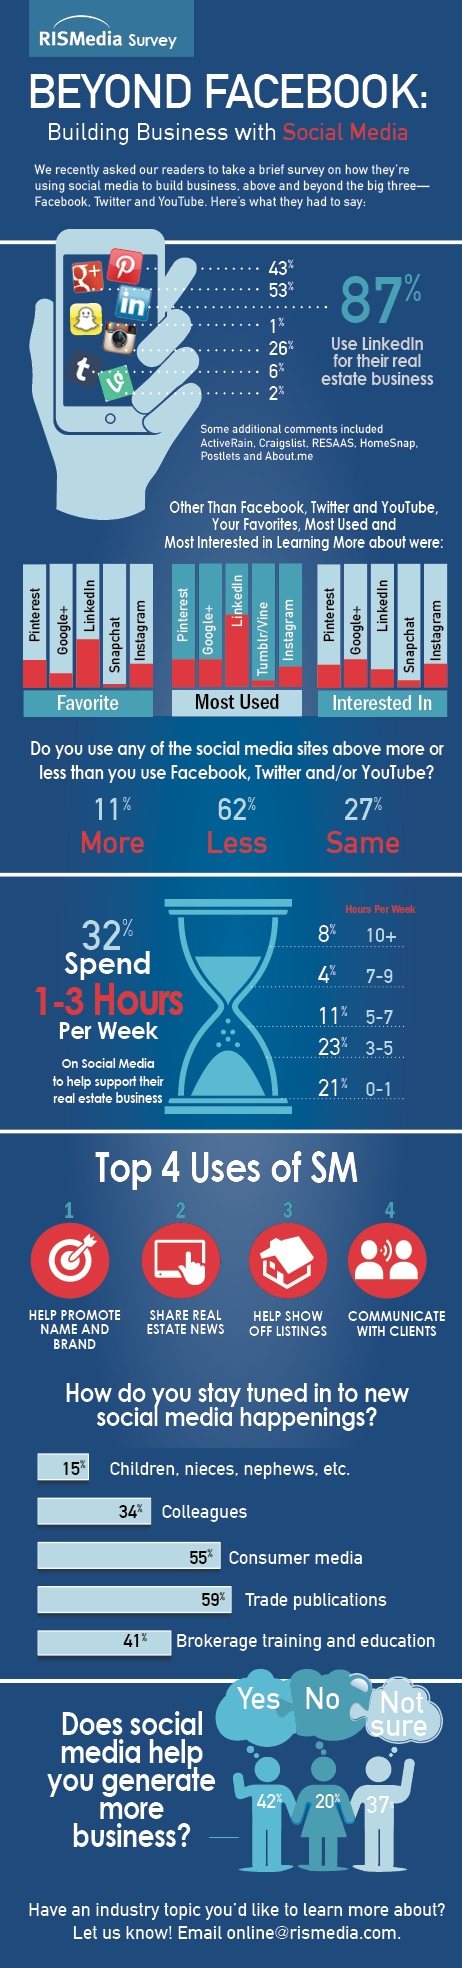 Beyond_Facebook_infographic